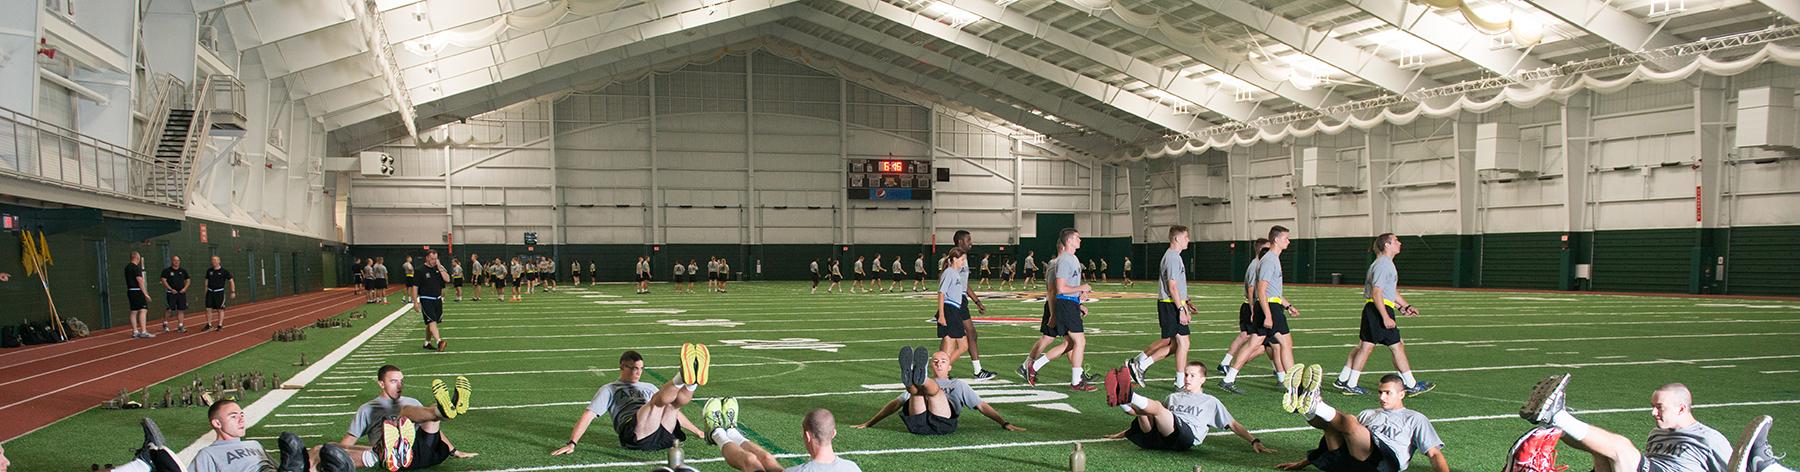 ROTC students training on the fieldhouse turf